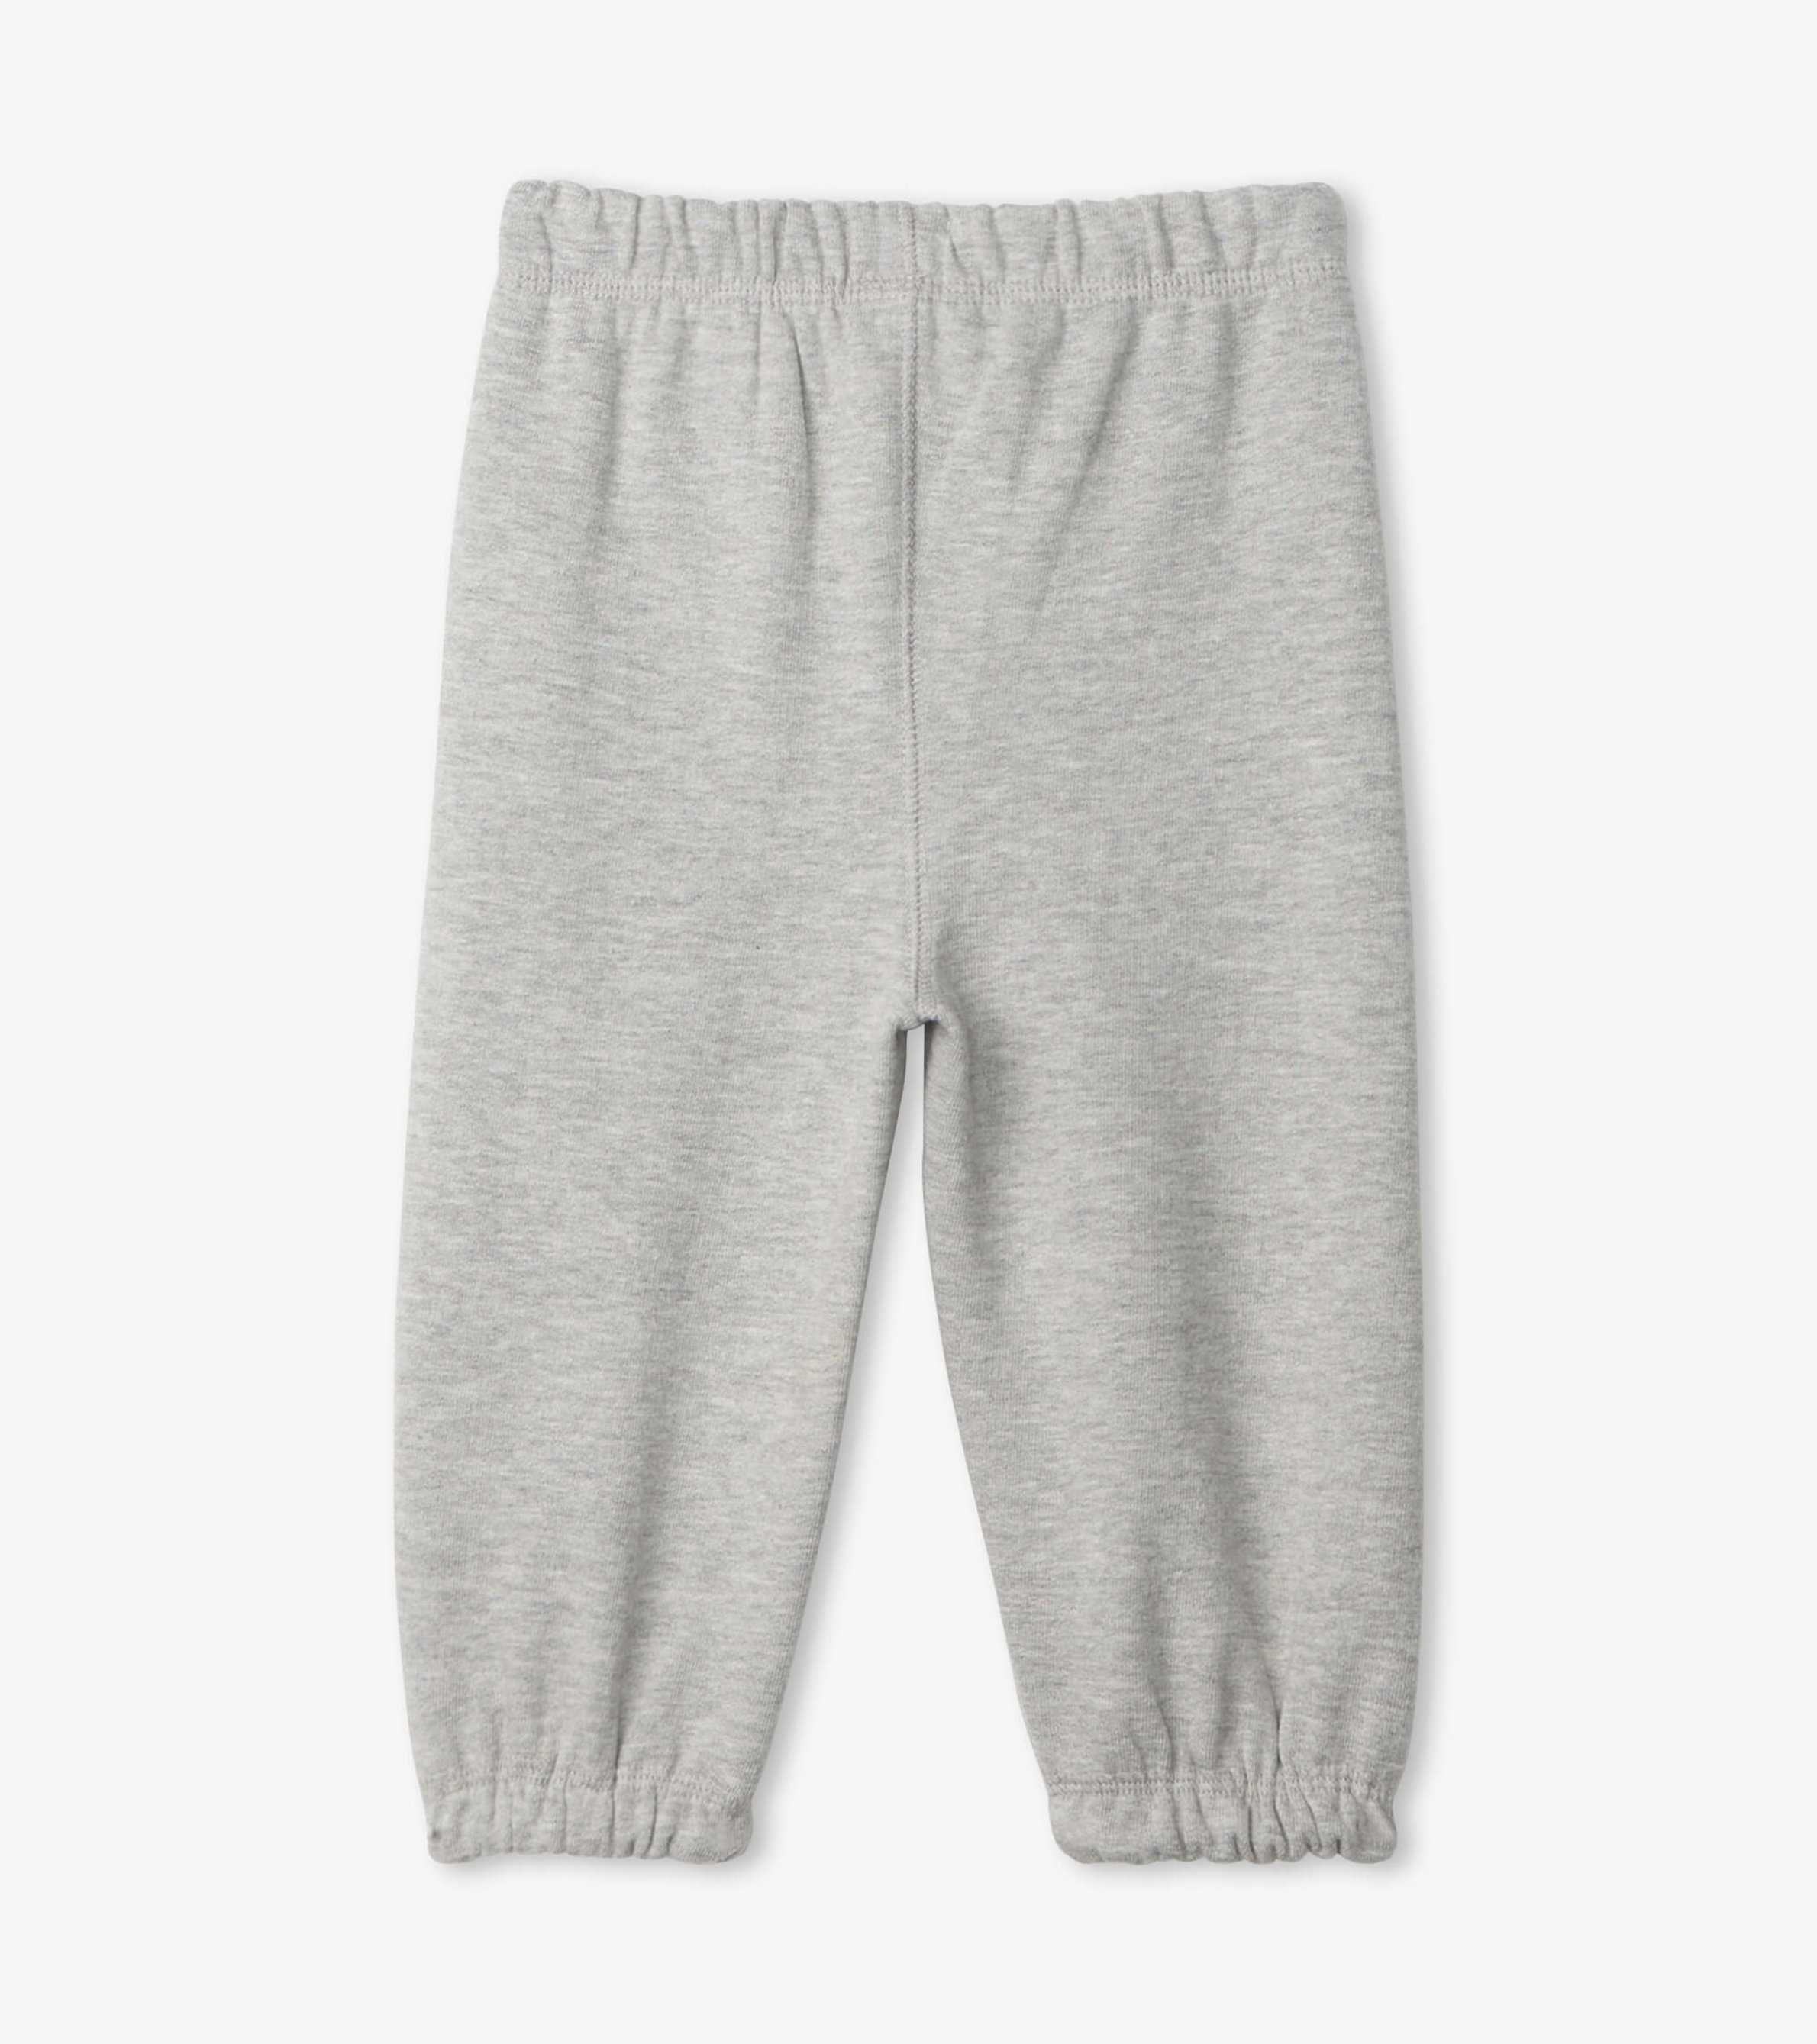 https://cdn.hatley.com/product_images/grey-french-terry-baby-joggers/S19GGI1111_A_jpg/pdp_zoom.jpg?c=1643647301&locale=us_en